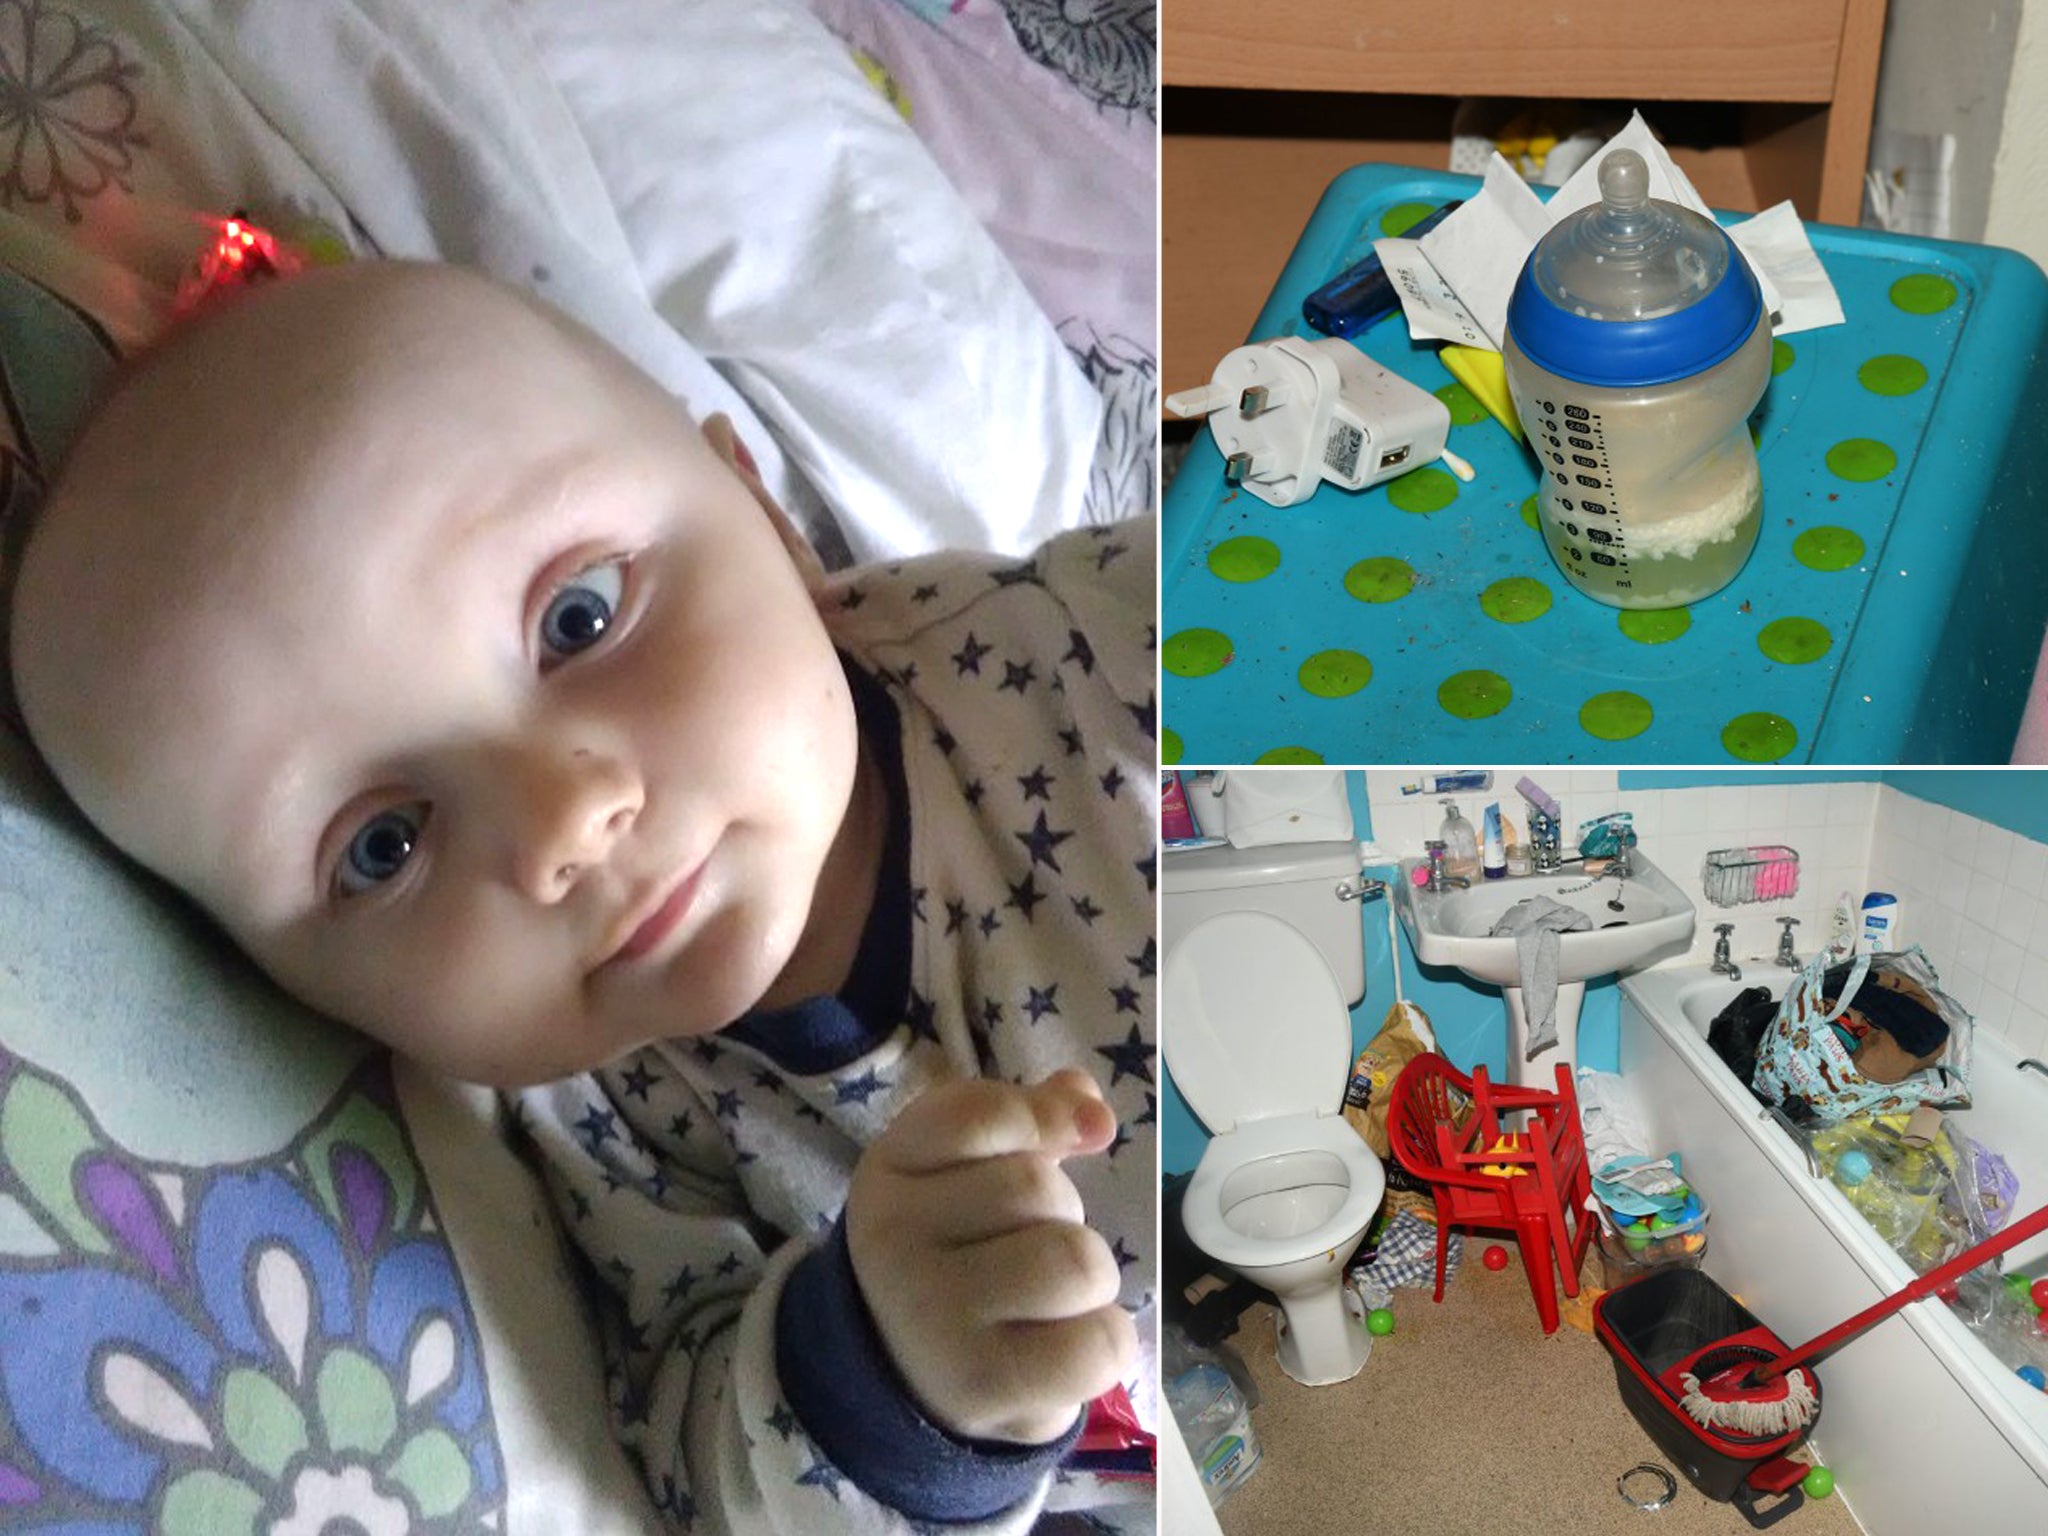 Finley Boden was murdered by his parents who hid their filthy living habits from social workers during lockdown